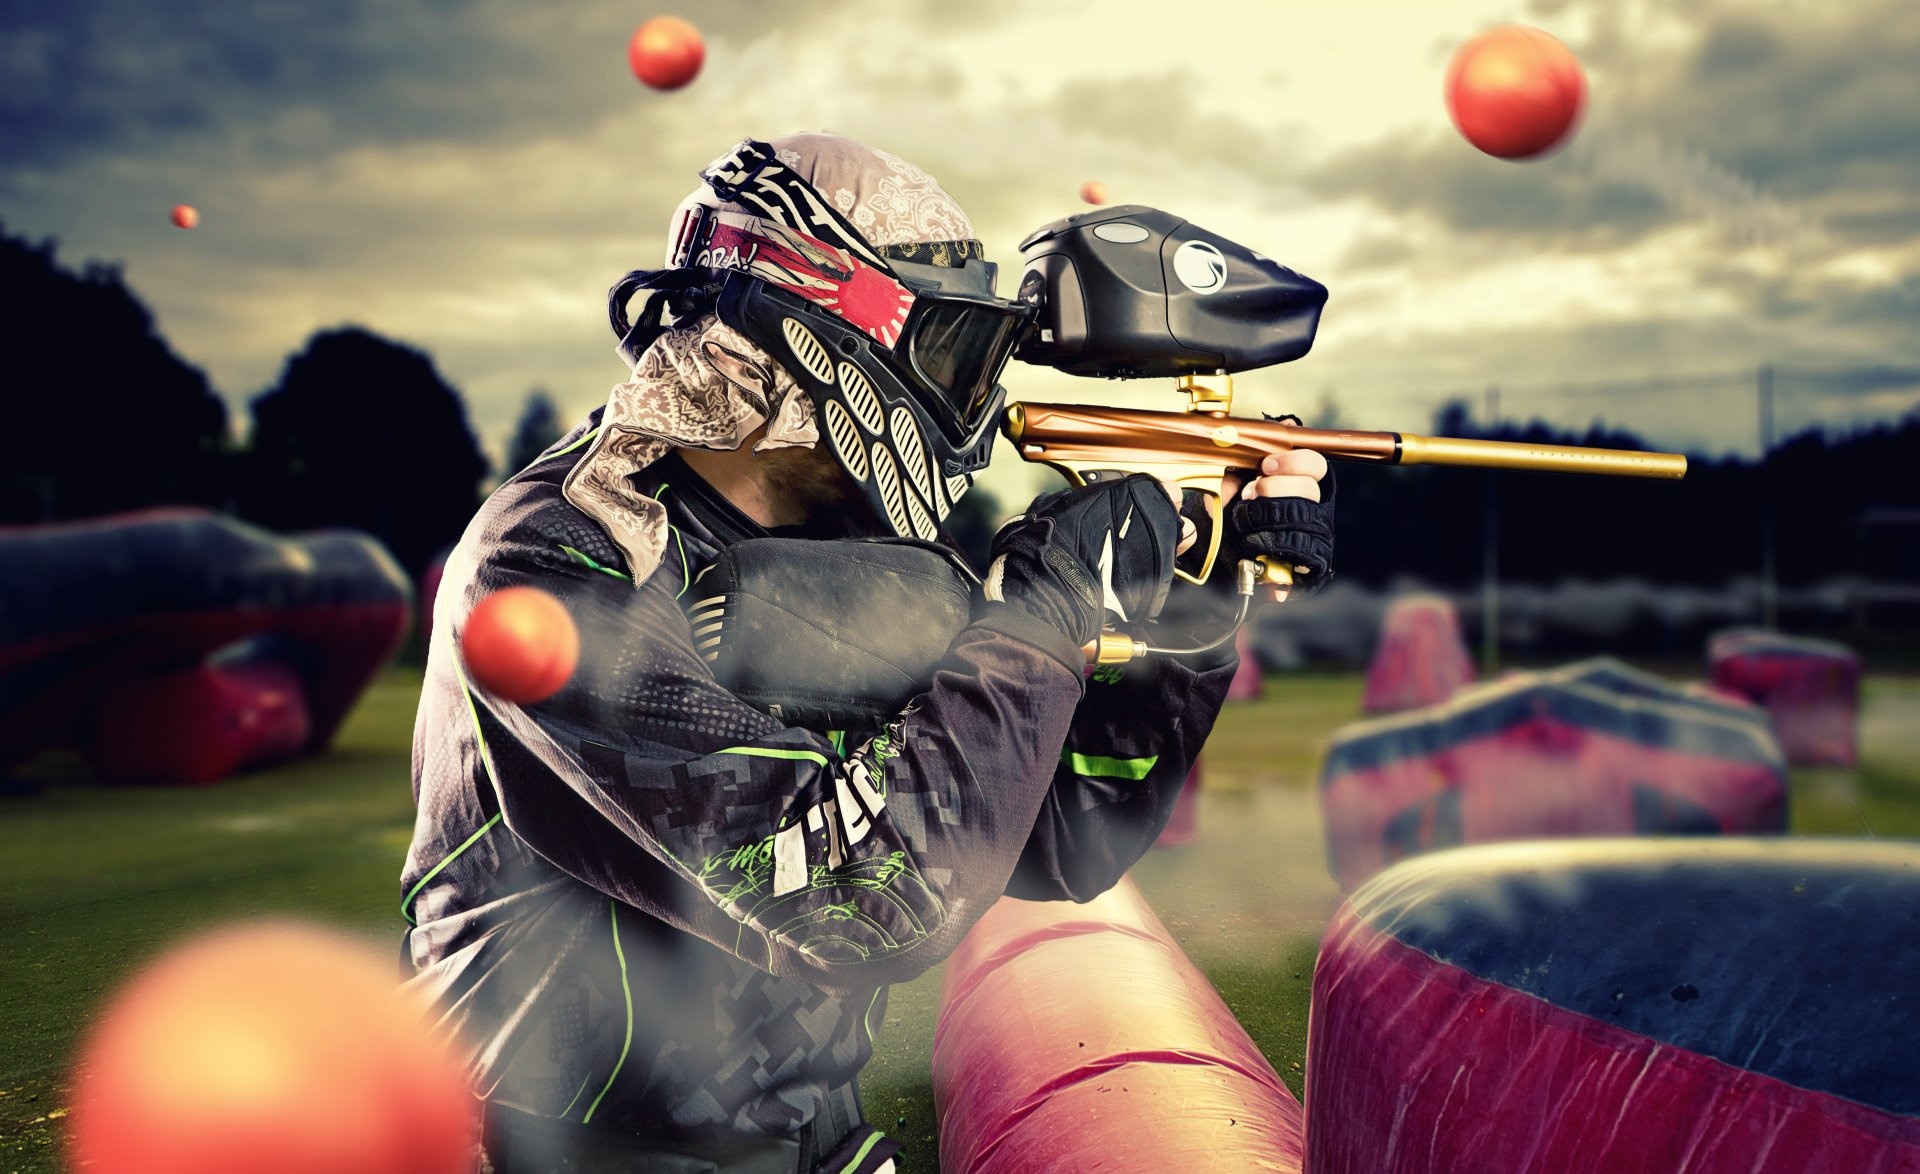 Paintball: Competitive action sport, Shooting opponents with a paint gun. 1920x1180 HD Background.